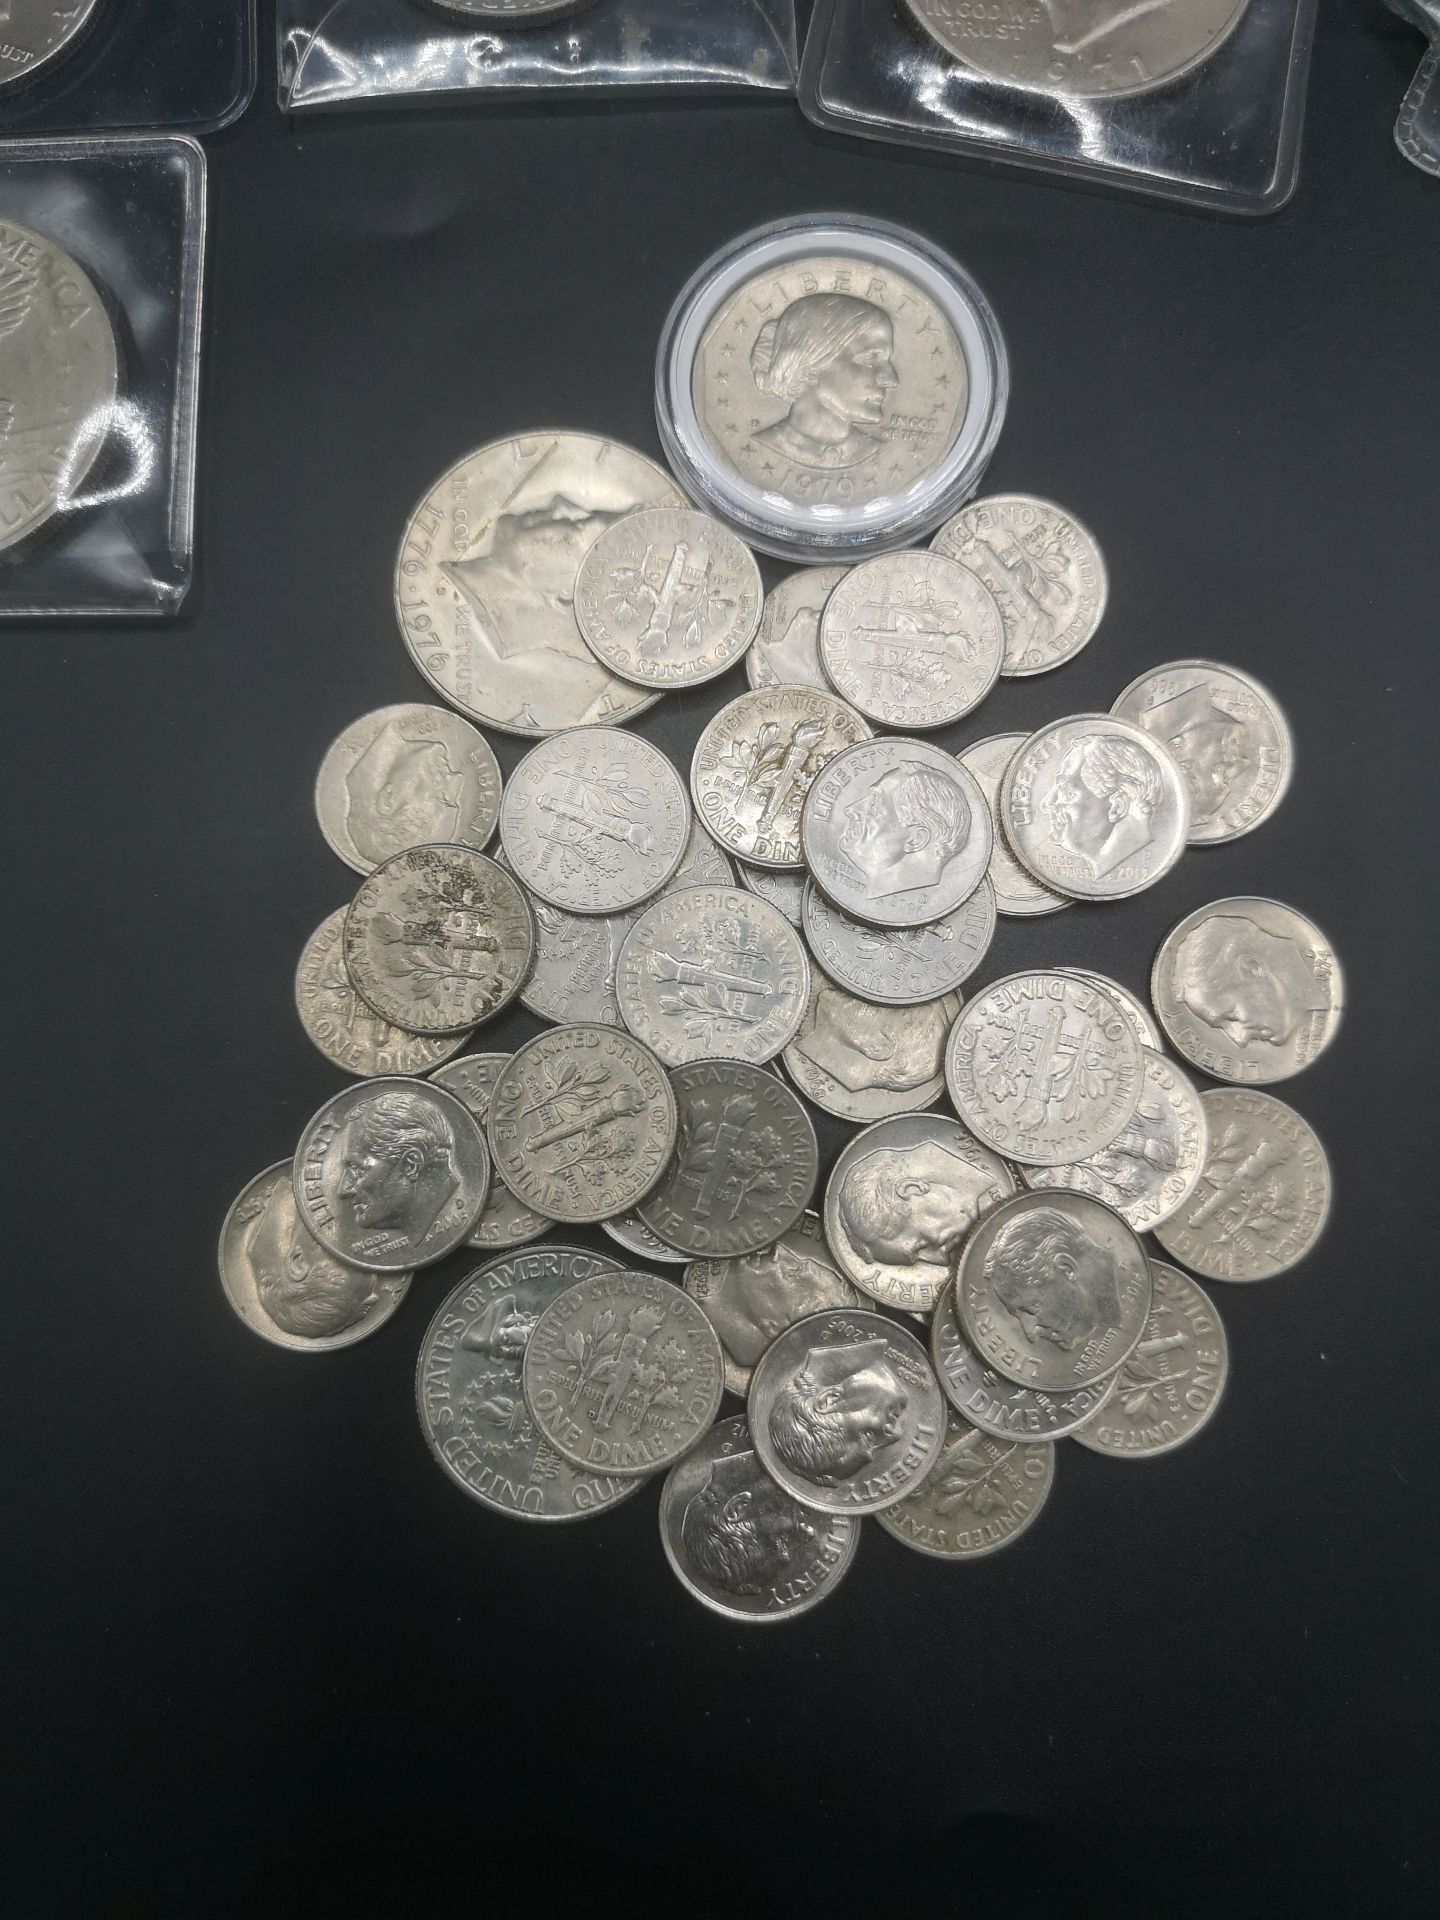 Quantity of US dollar coins, half dollars, dimes and quarters - Image 3 of 7